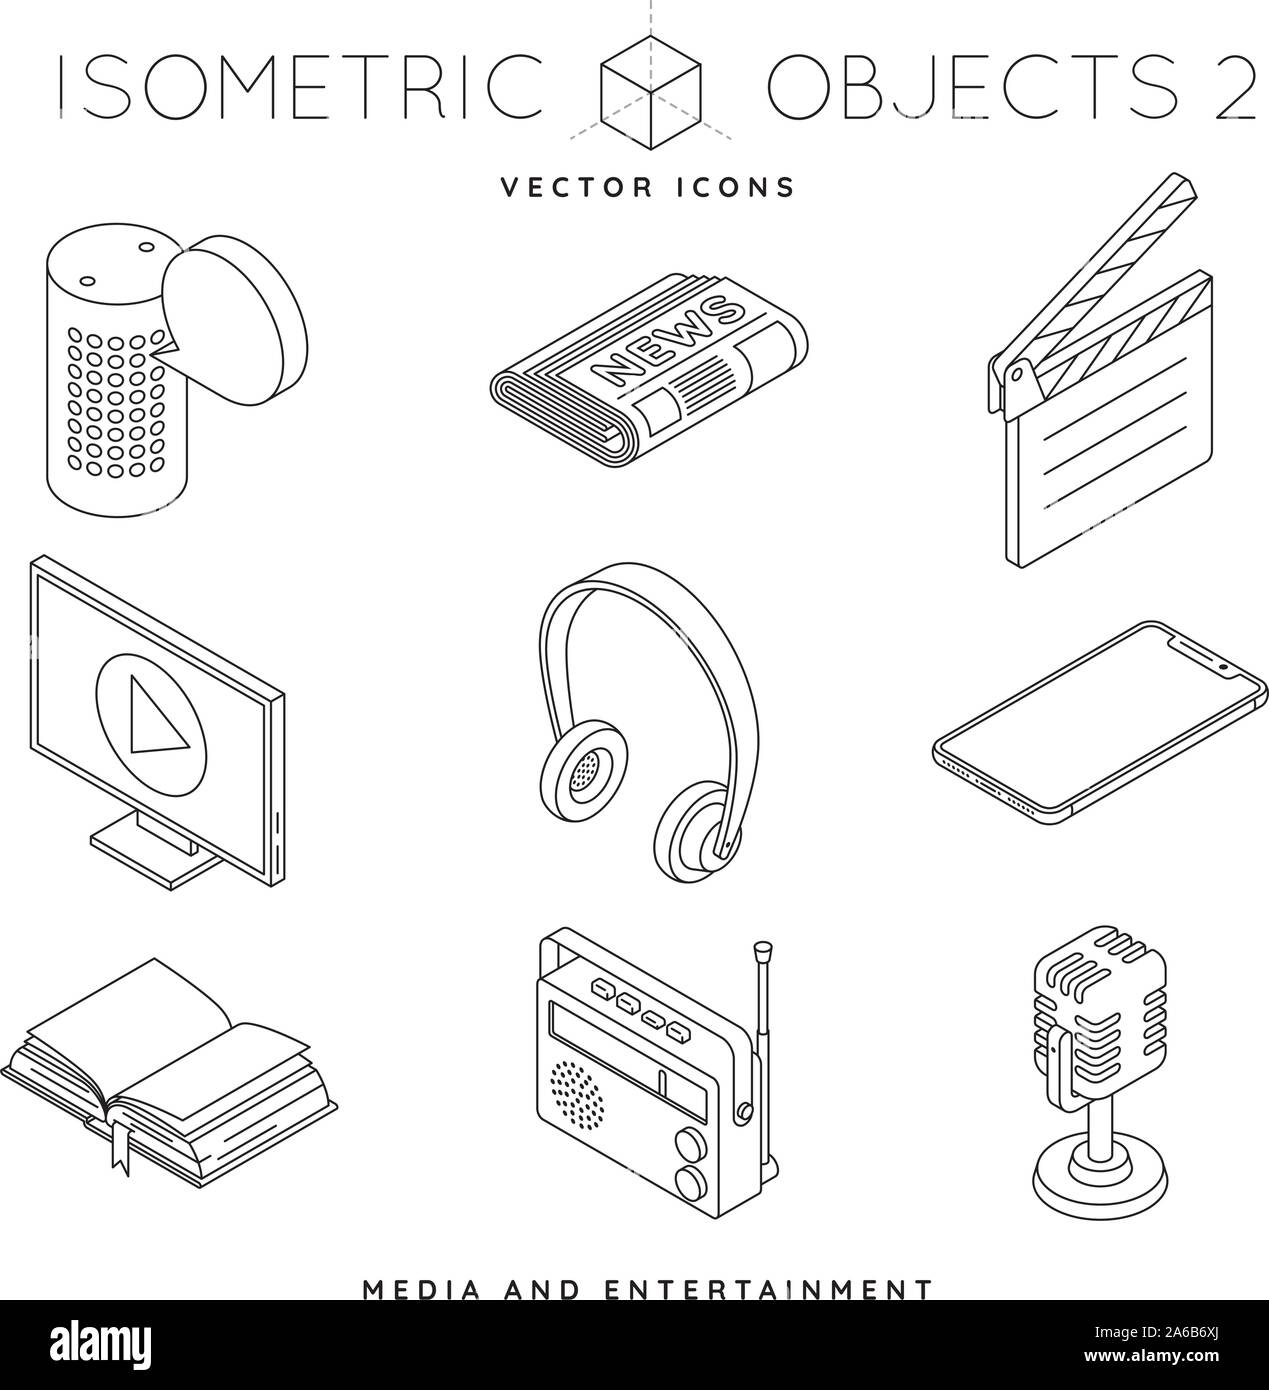 Collection of isometric outline icons of media and electronic equipment like smart speaker, microphone, radio or flatscreen TV set. Entertainment indu Stock Vector